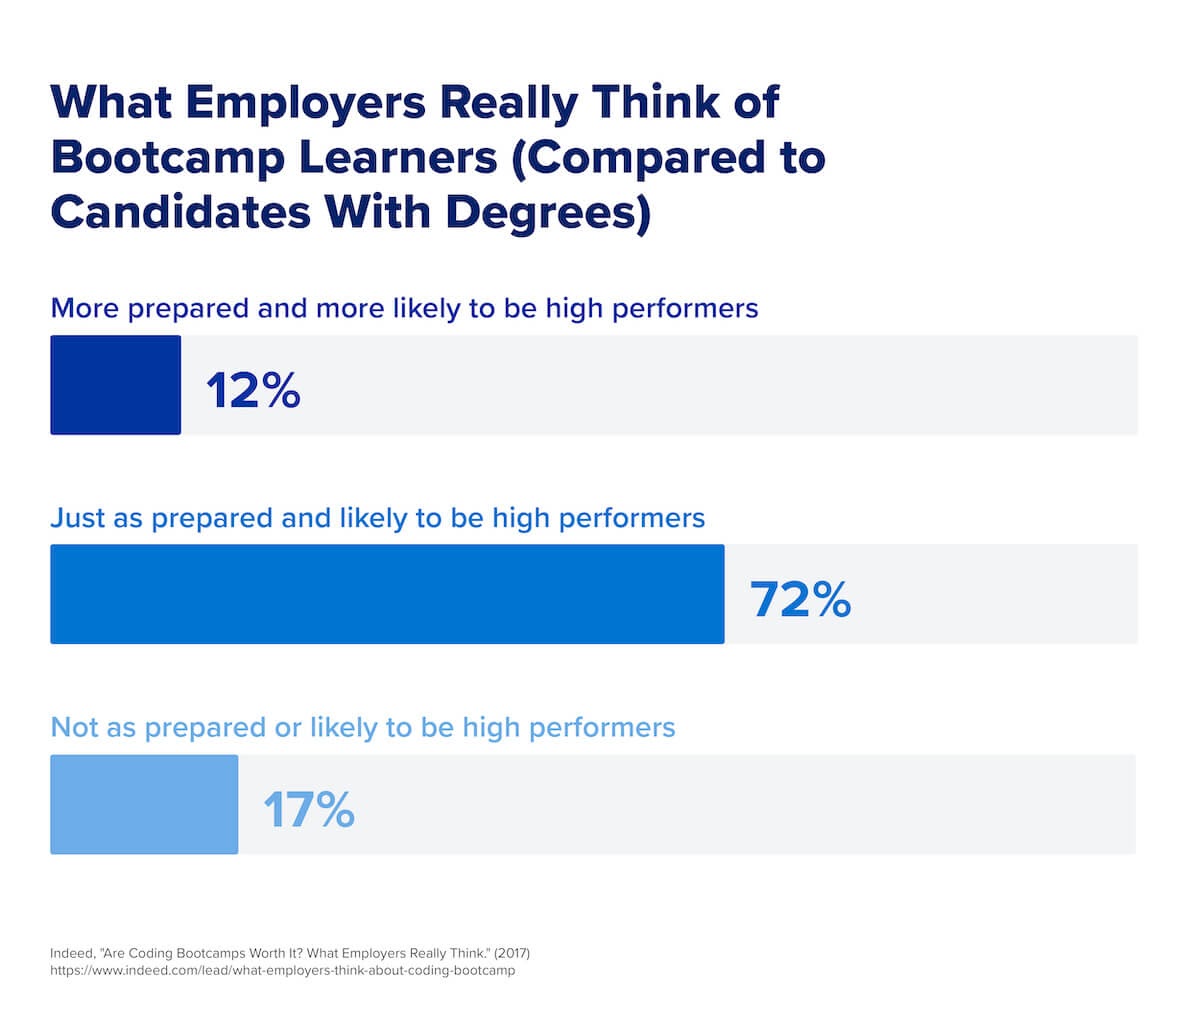 A chart that shows what employers really think of bootcamp learners. 